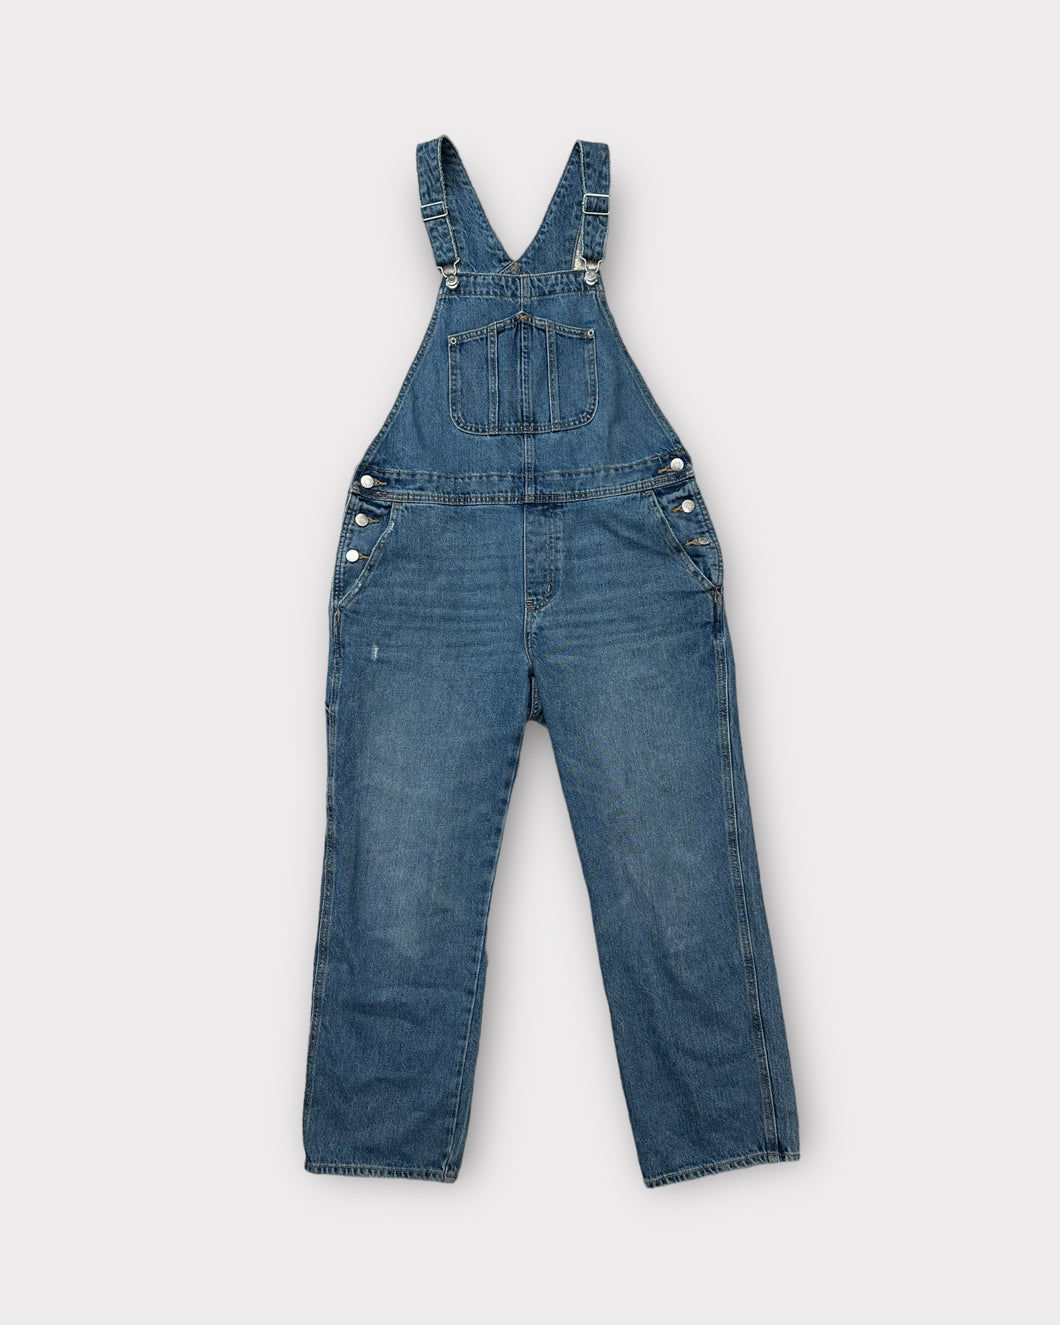 Old Navy Slouchy Straight Ankle Length Medium Wash Overalls (10)